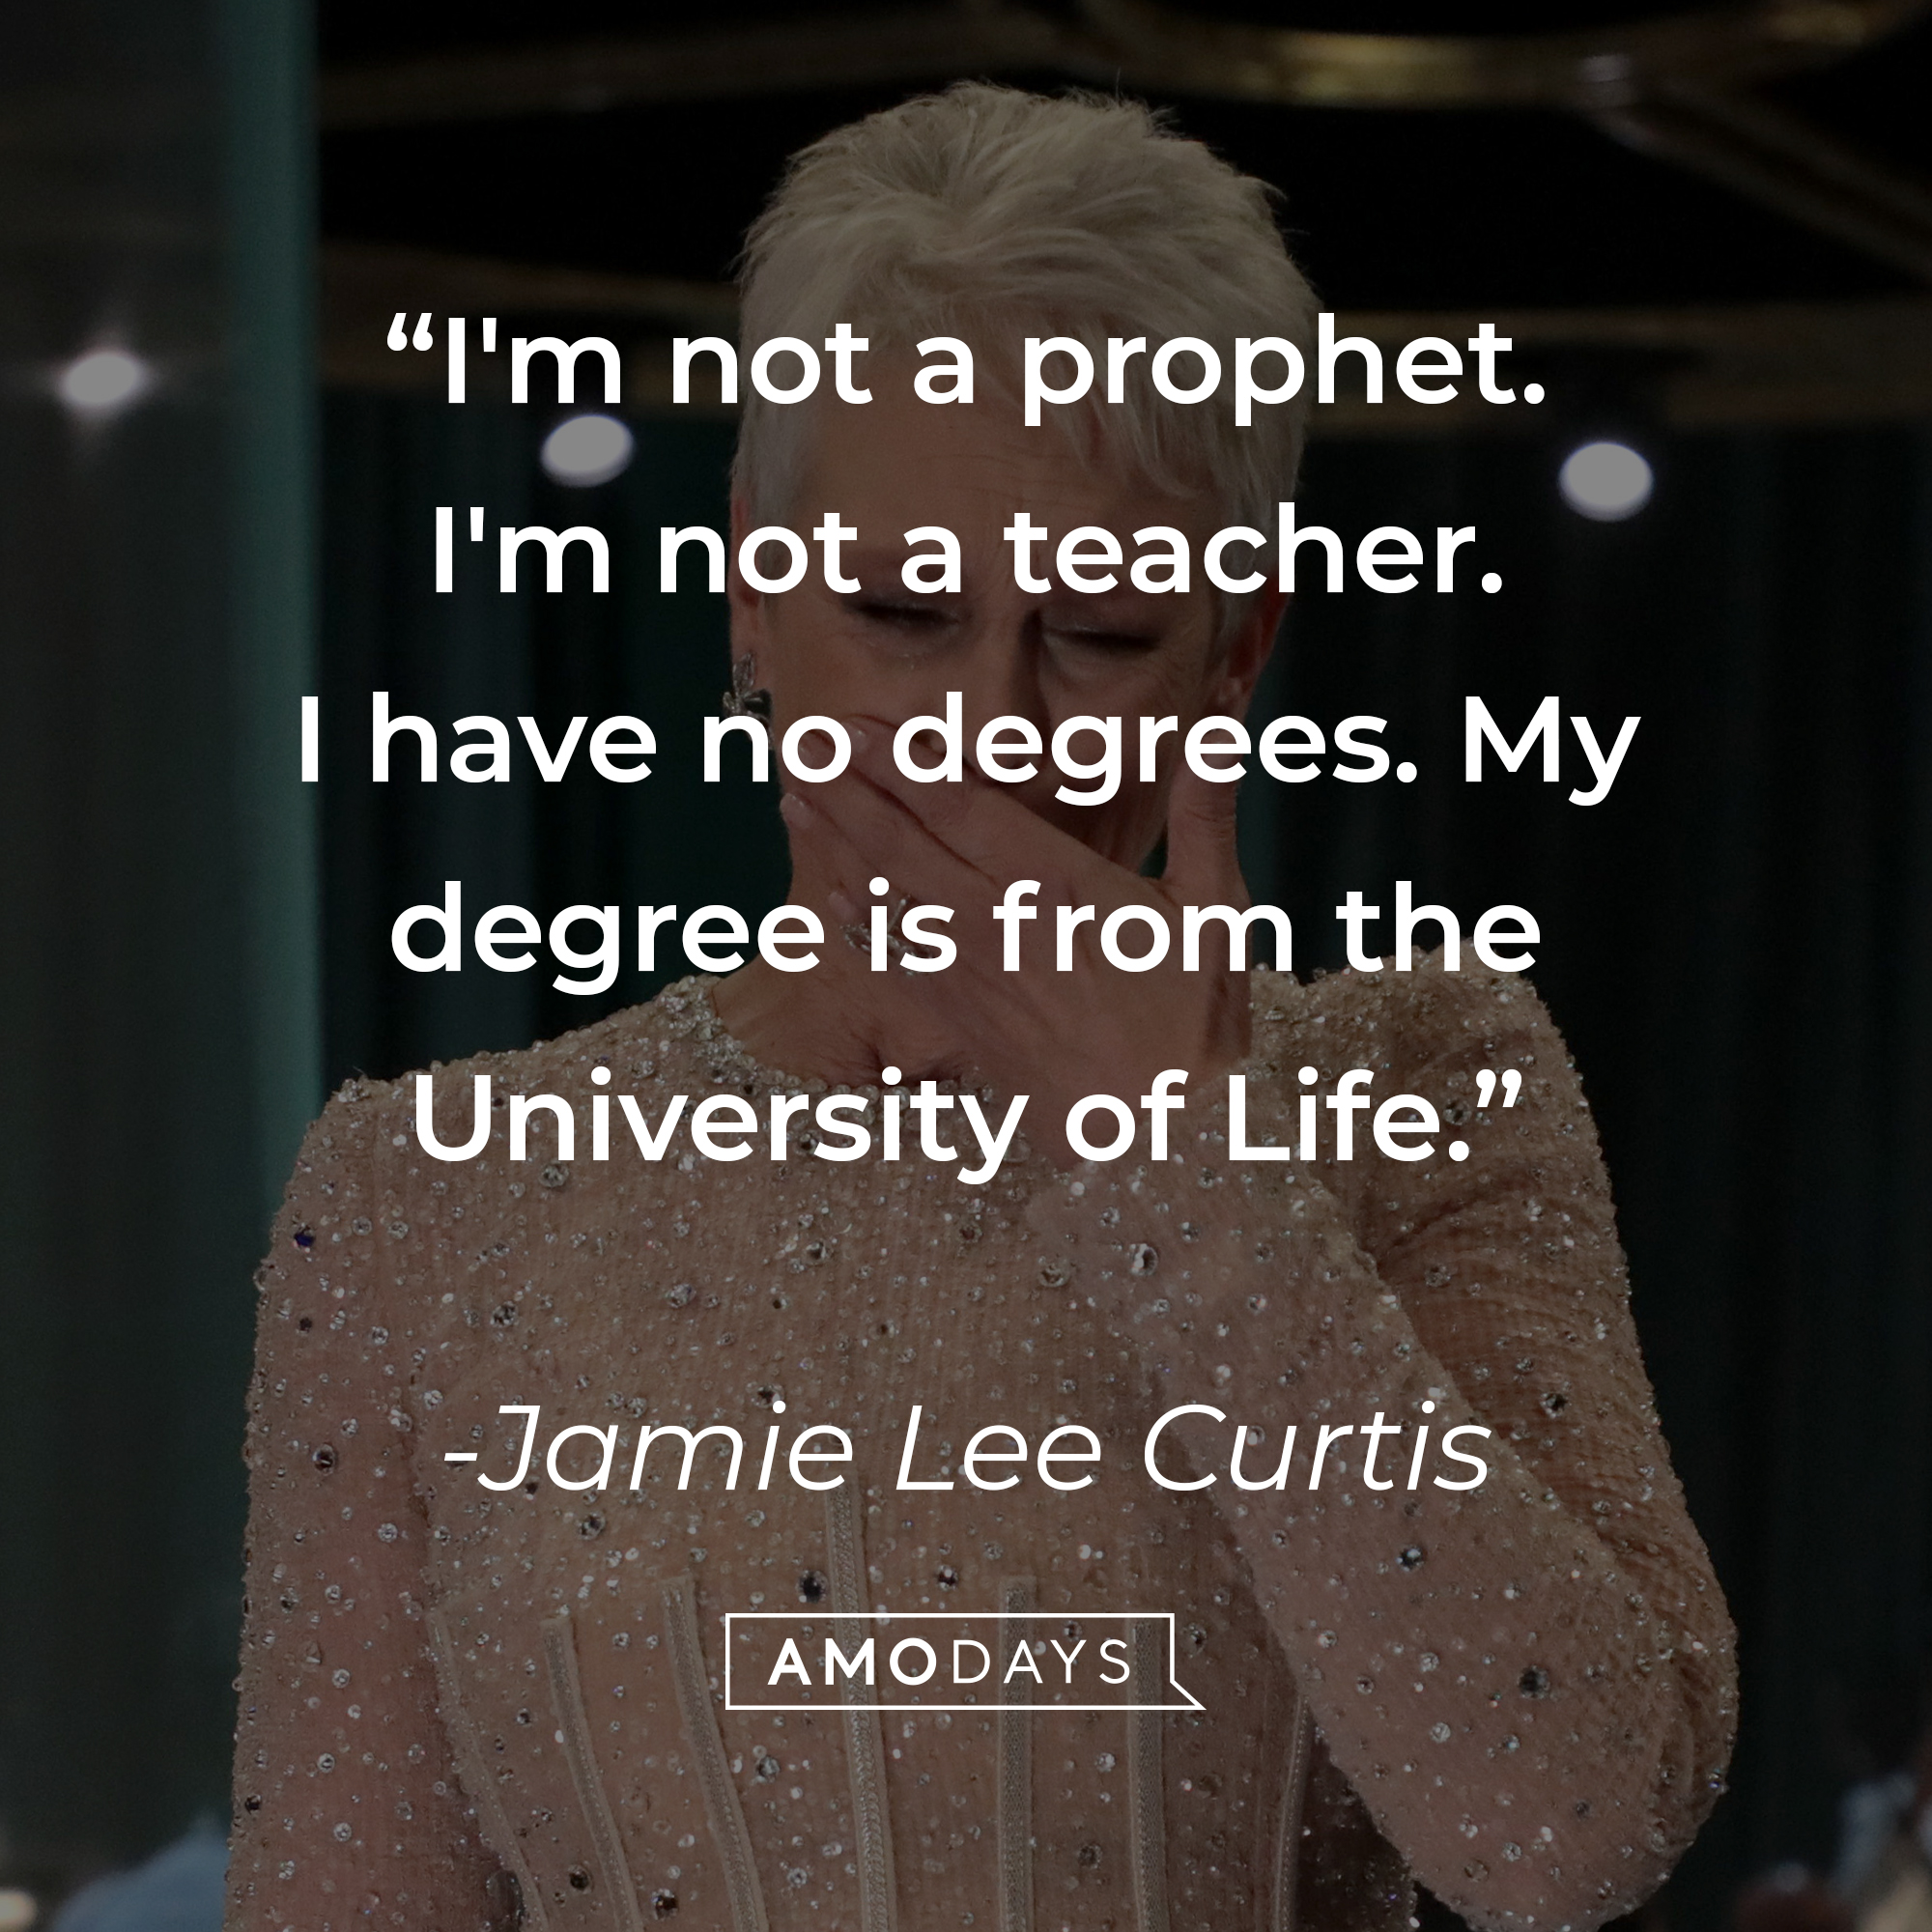 An image of Jamie Lee Curtis, with her quote: "I'm not a prophet. I'm not a teacher. I have no degrees. My degree is from the University of Life." | Source: Getty Images